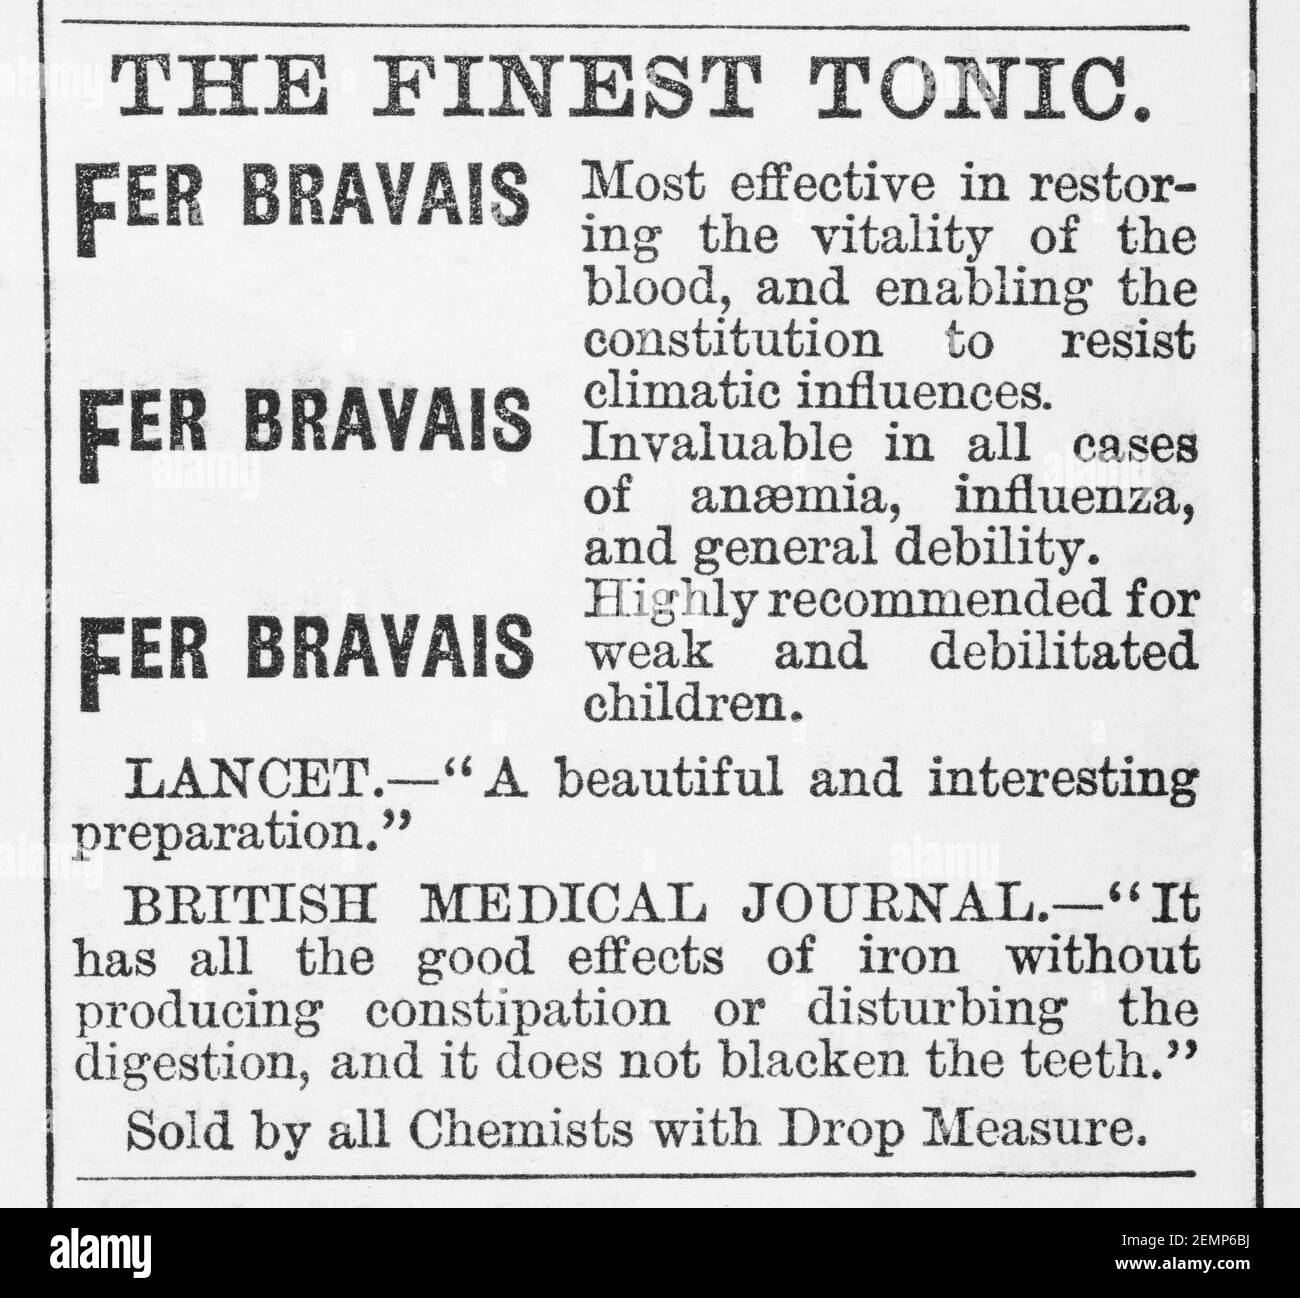 Old Victorian magazine newsprint Fer Bravais medicinal tonic advert from 1894 - before the dawn of advertising standards. History of medicine. Stock Photo